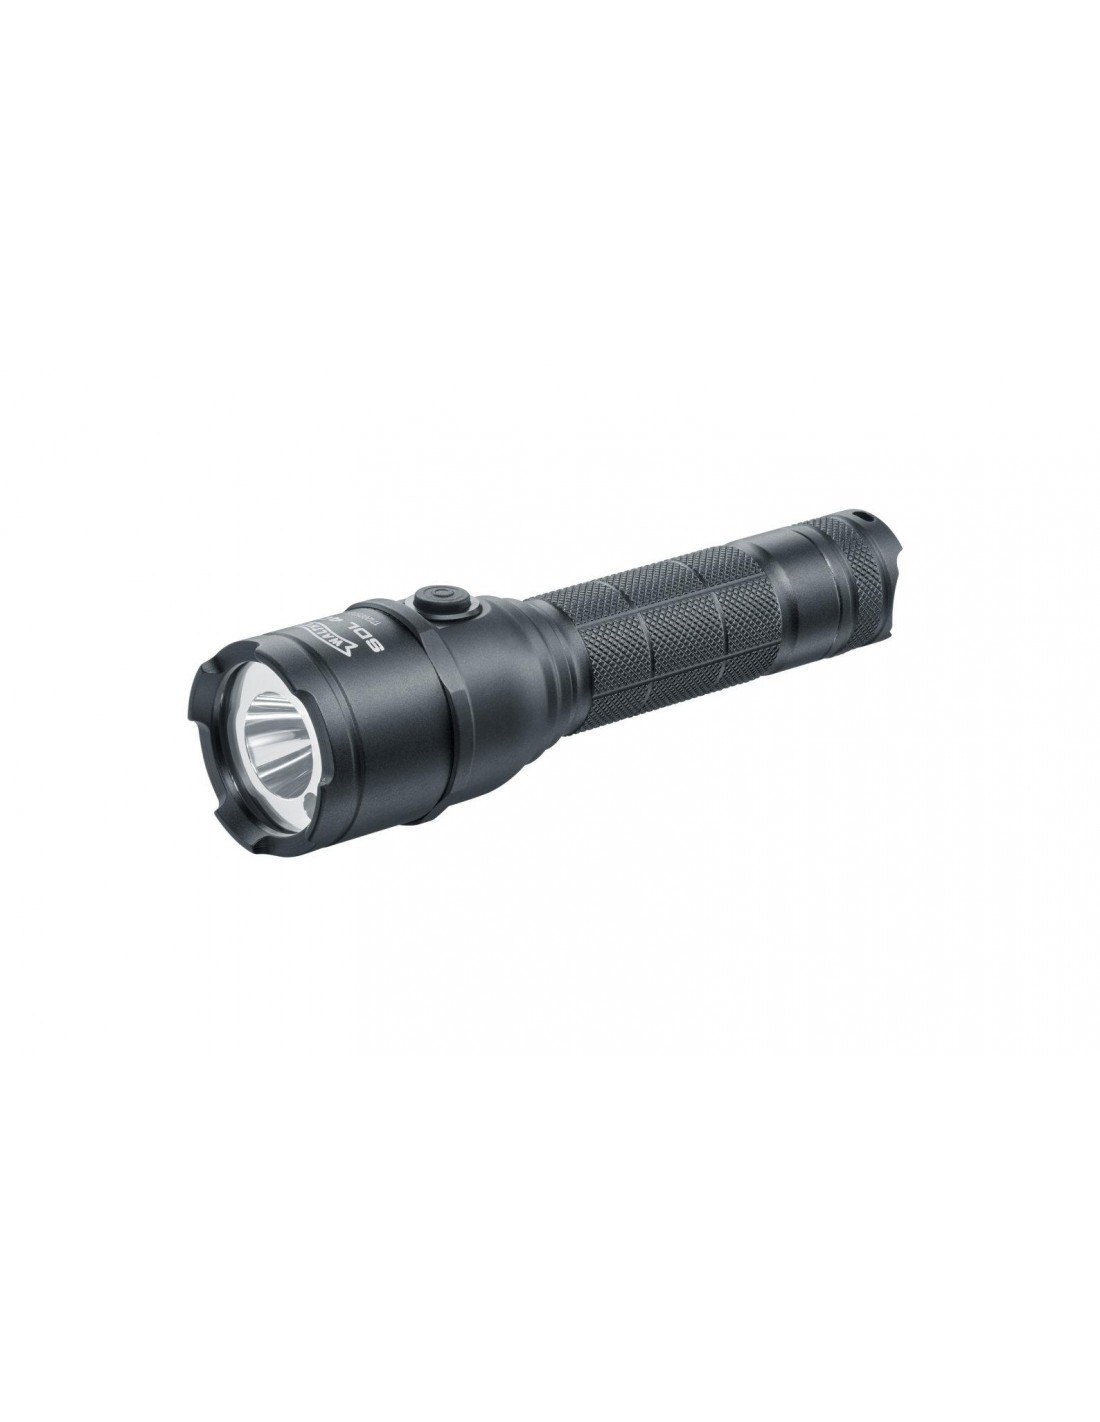 Walther Taschenlampe - Walther SDL 400 Beleuchtungsart - Taschenlampen, Lampenfarbe - Schwarz, von Walther